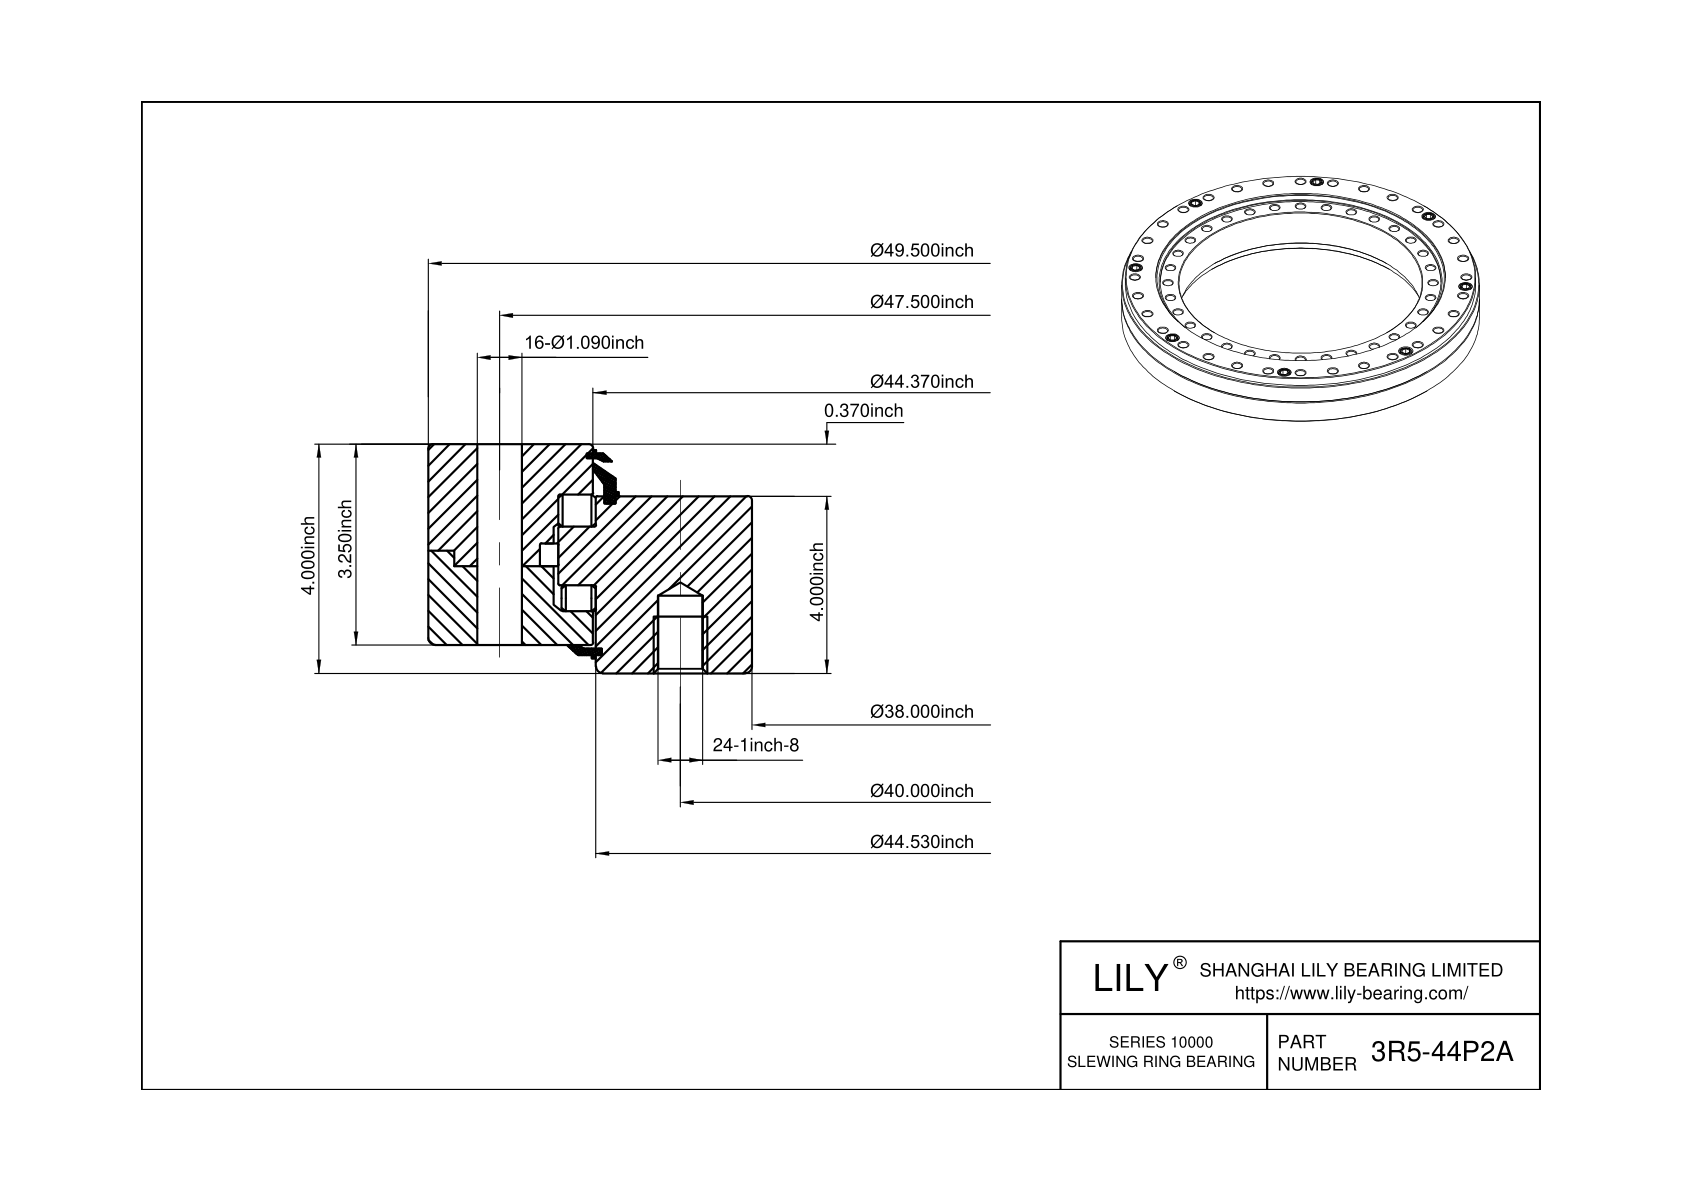 3R5-44P2A Three-Row Cross Roller Slewing Ring Bearing cad drawing